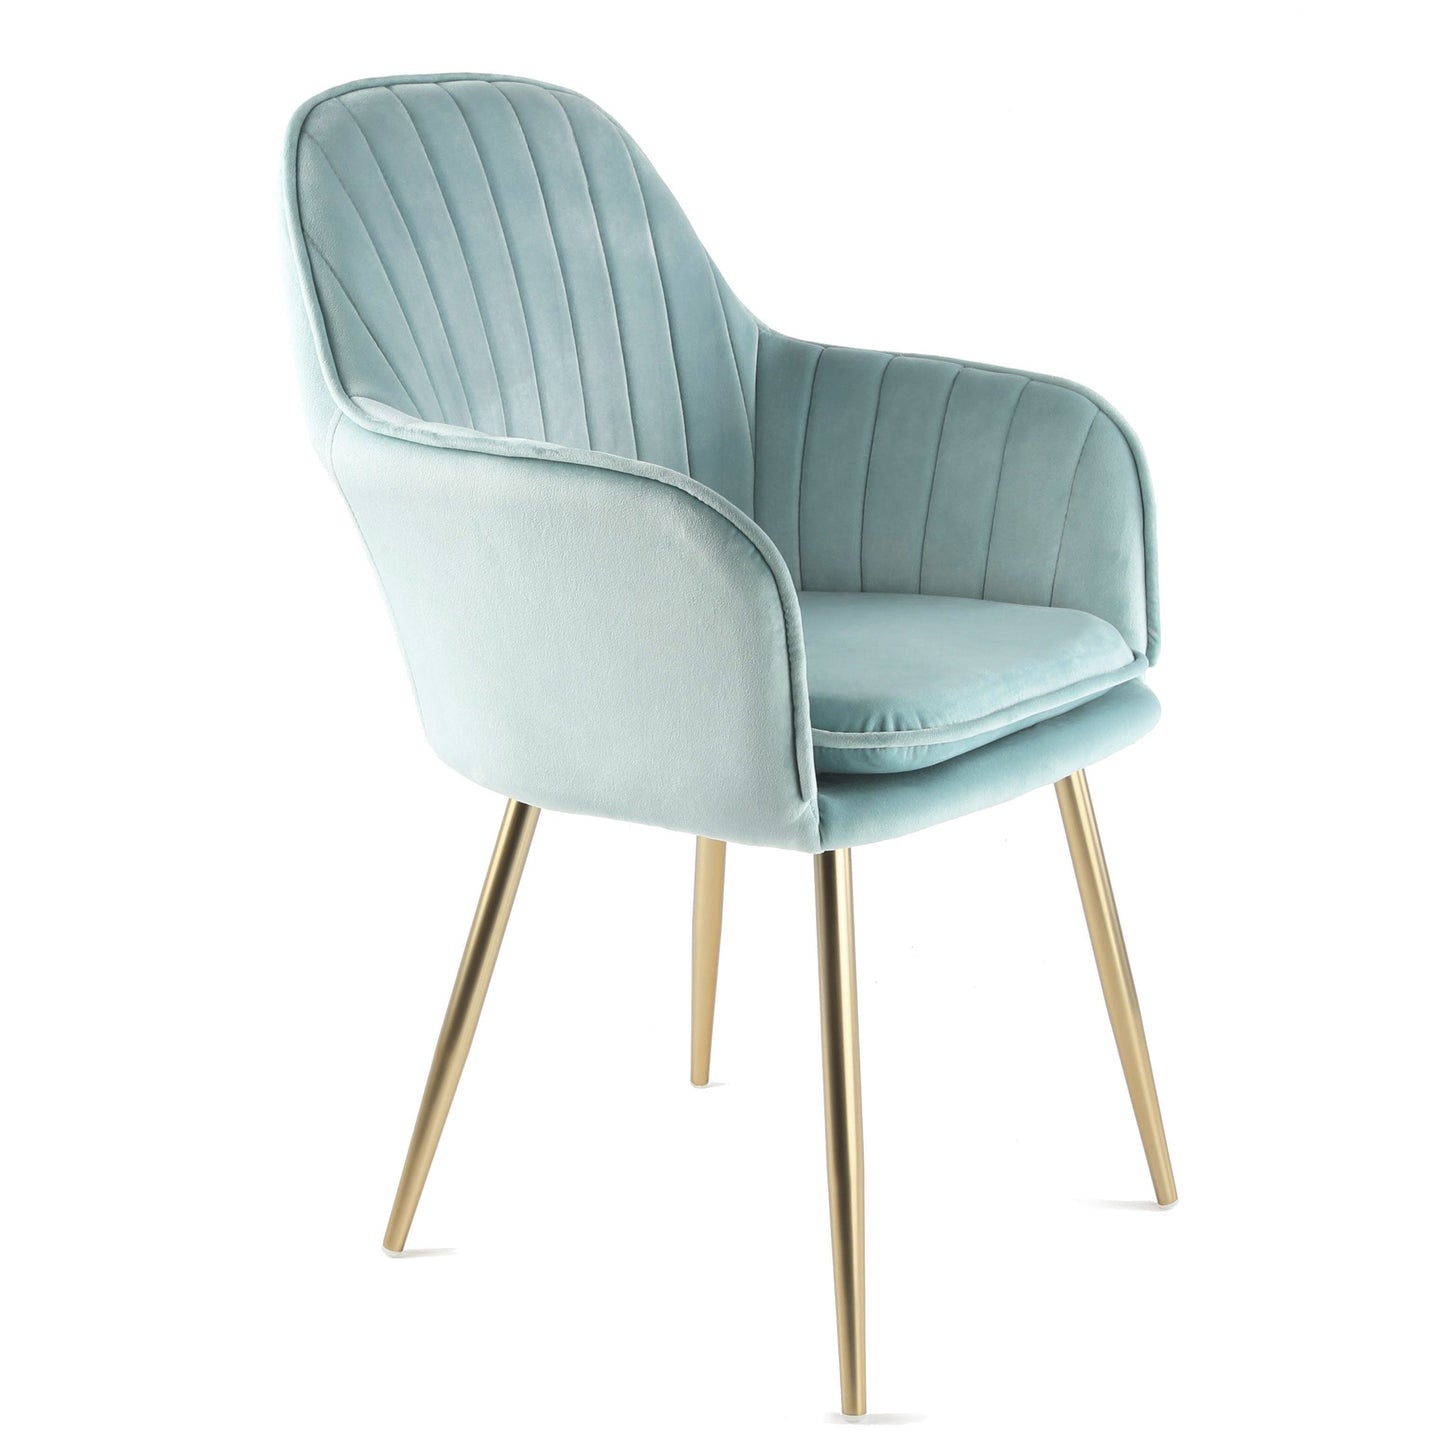 Muse accent chair – light blue with gold legs - Laura James